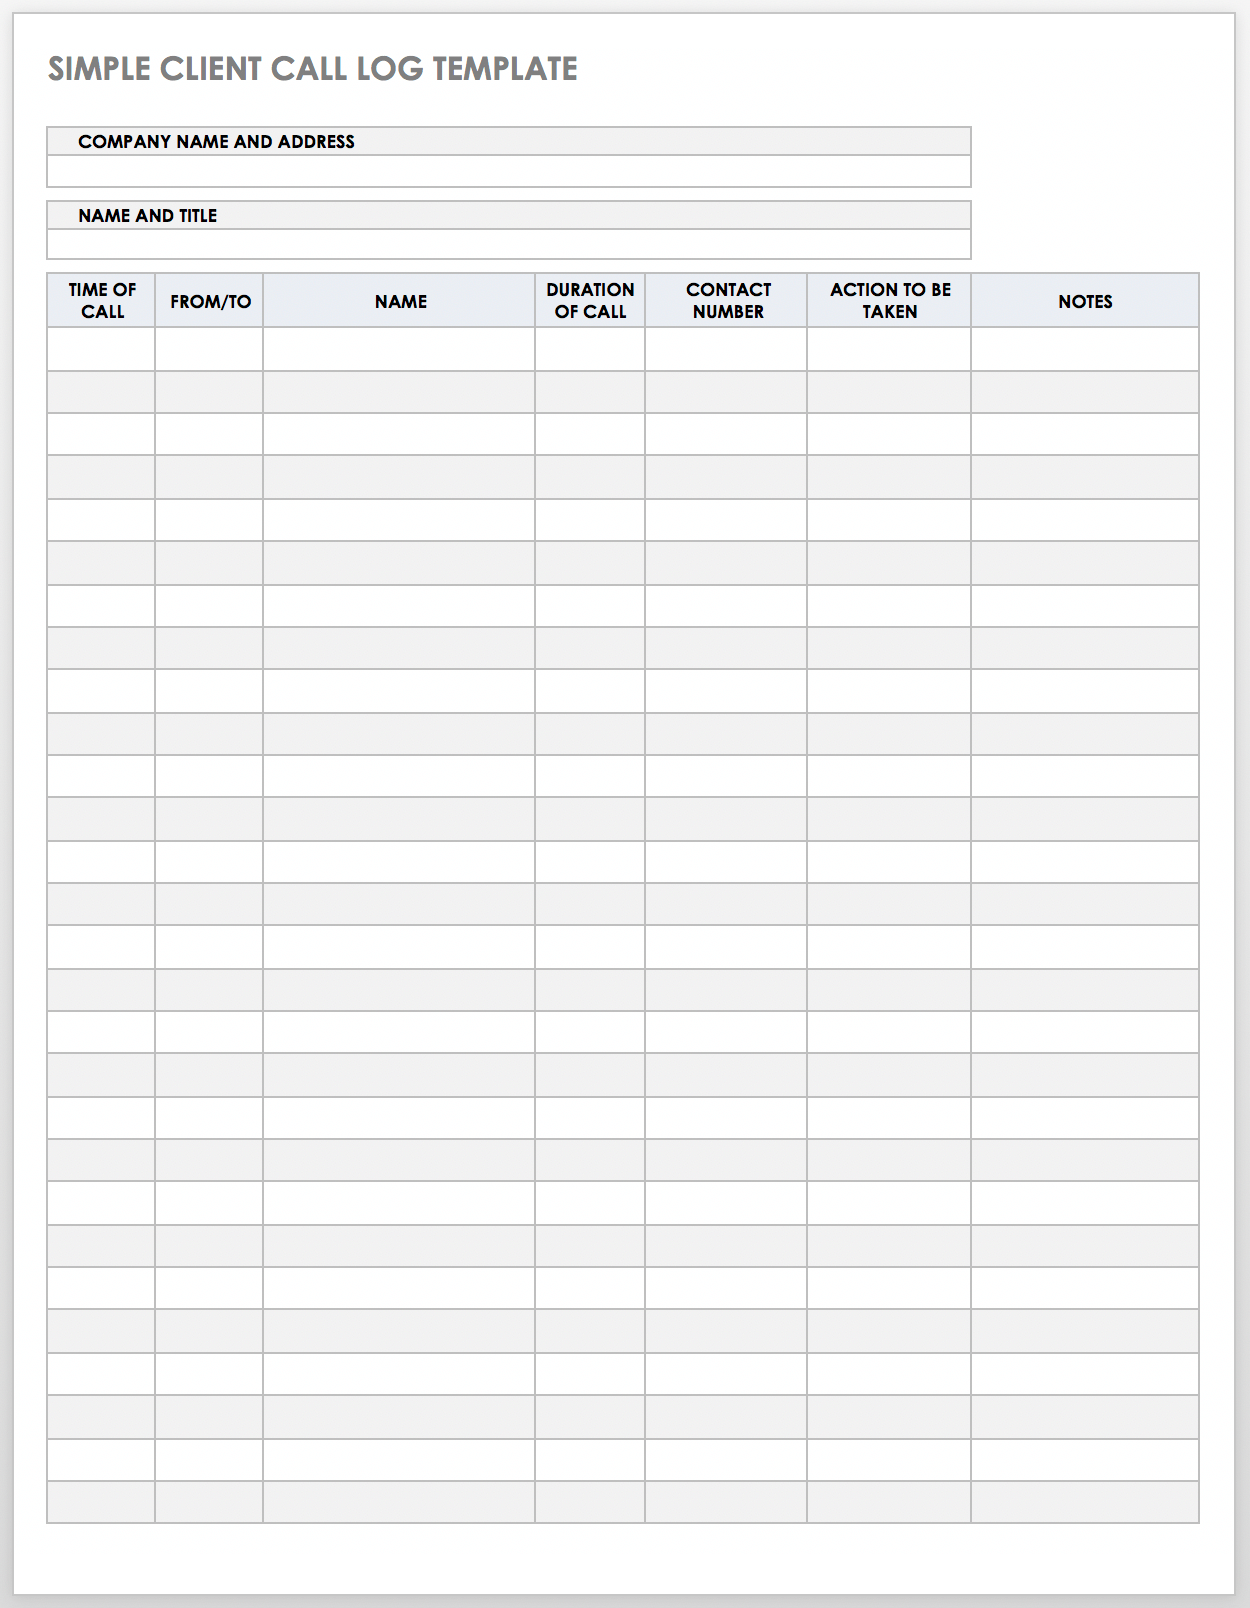 Free Client Call Log Templates  Smartsheet Within Customer Contact Report Template